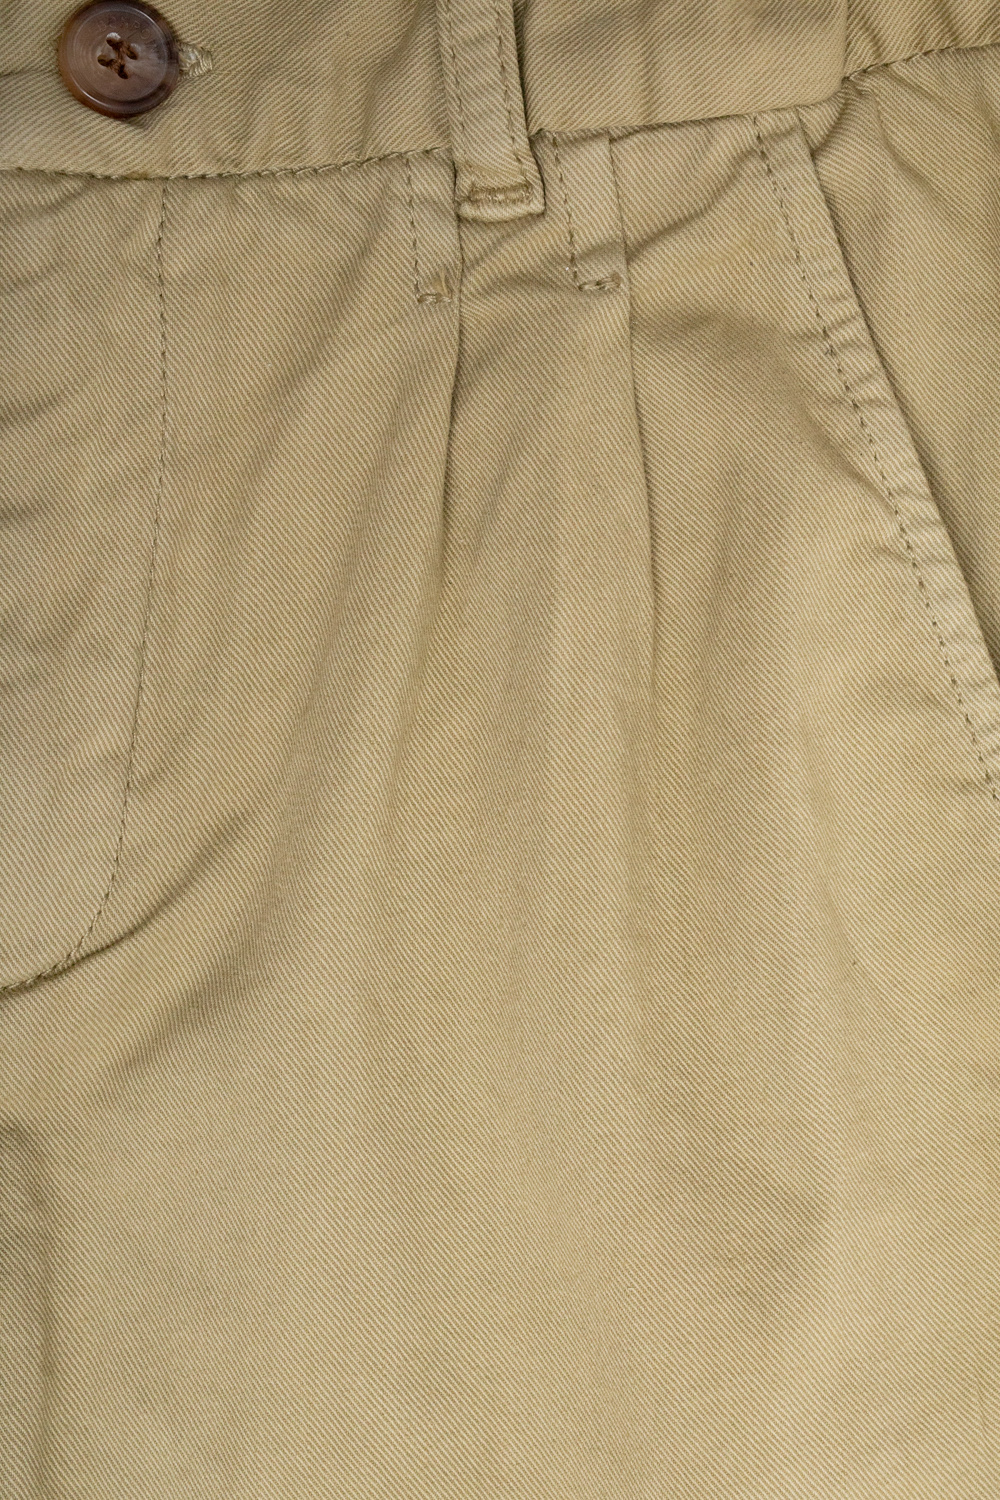 Bonpoint  Script trousers with pockets